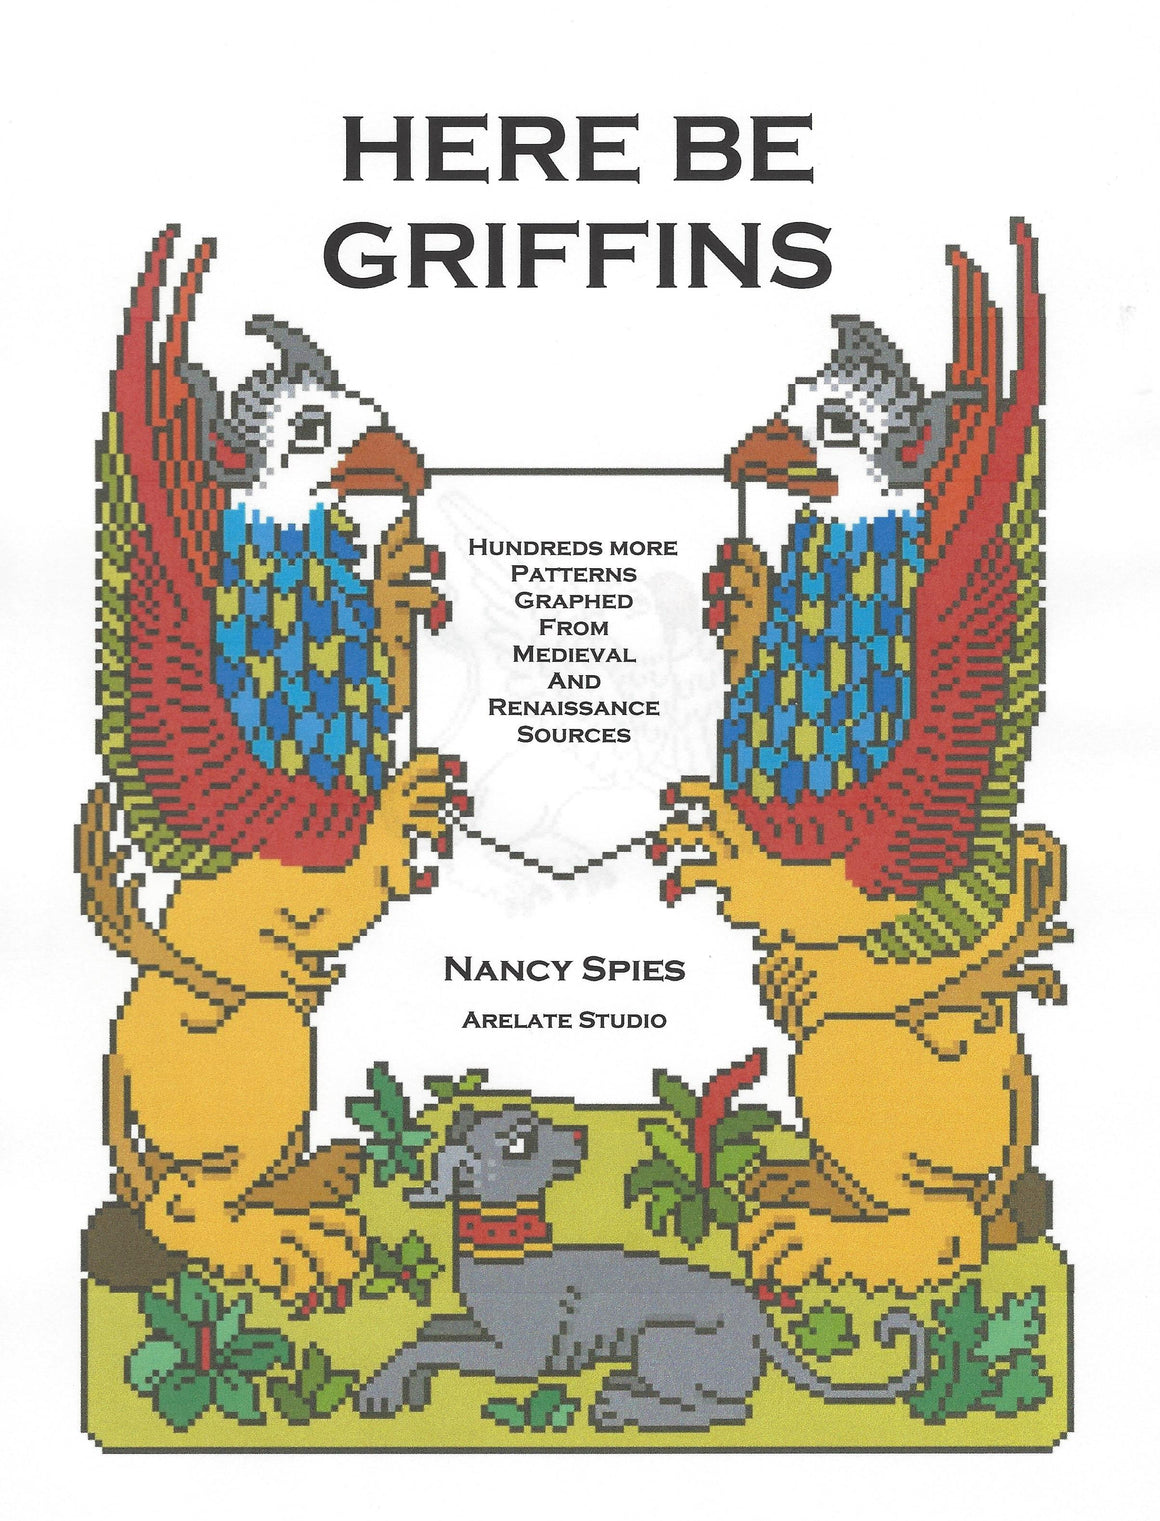 Here Be Griffins: Hundreds More Patterns Graphed from Medieval and Renaissance Sources